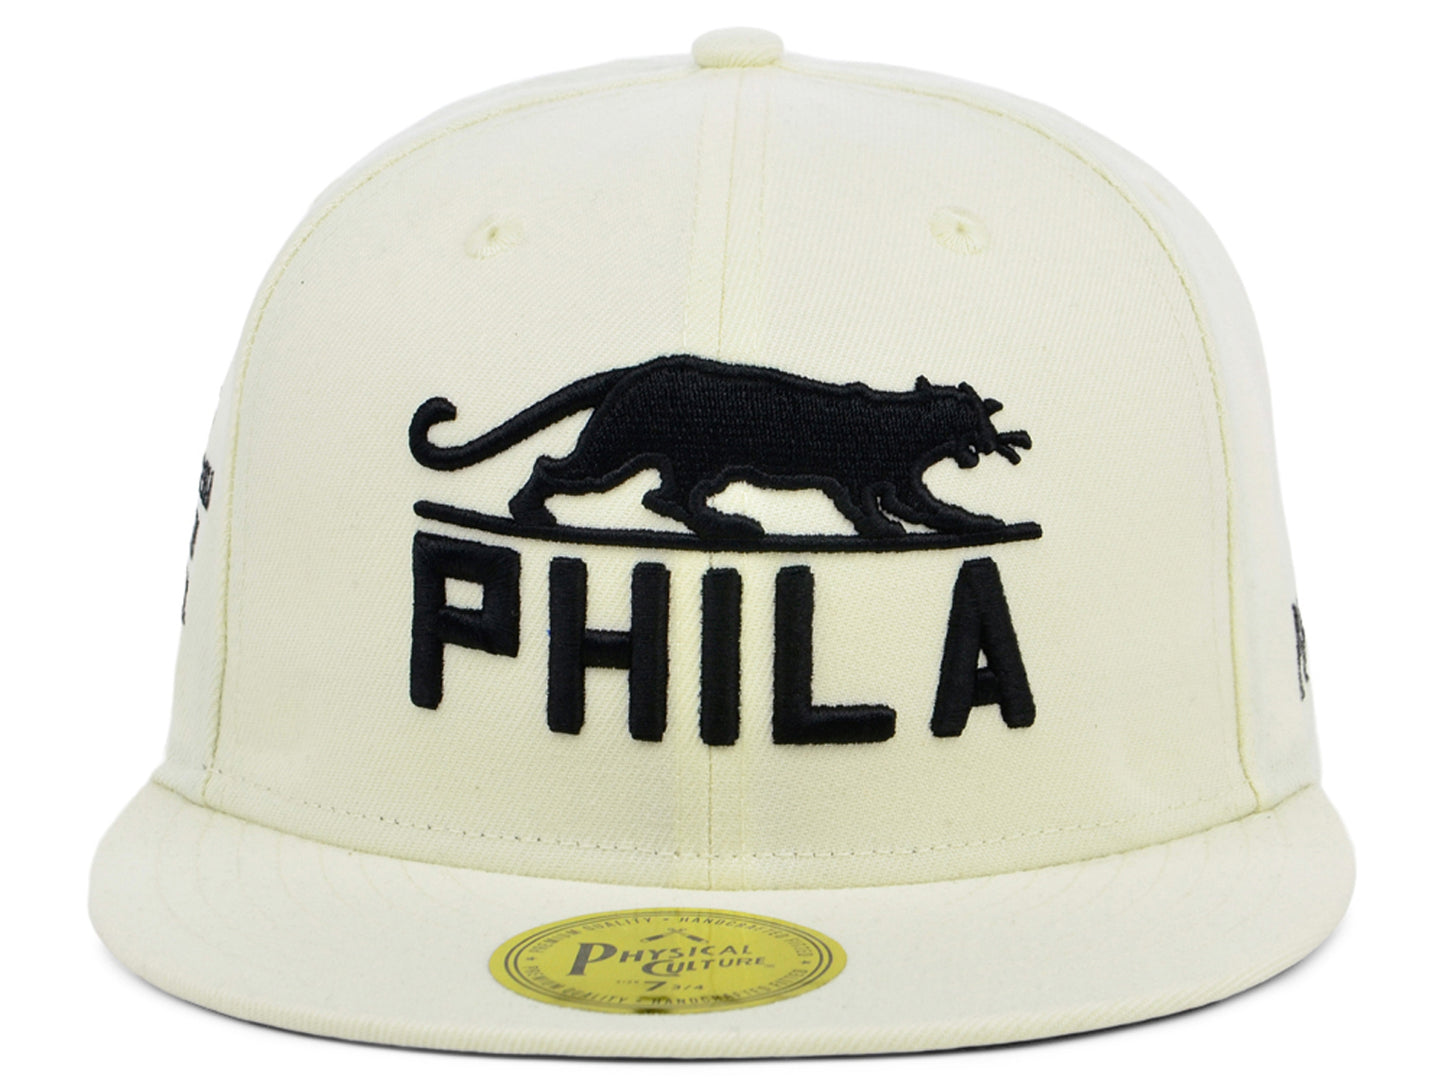 Philadelphia Panthers "PHILA" Fitted Cap